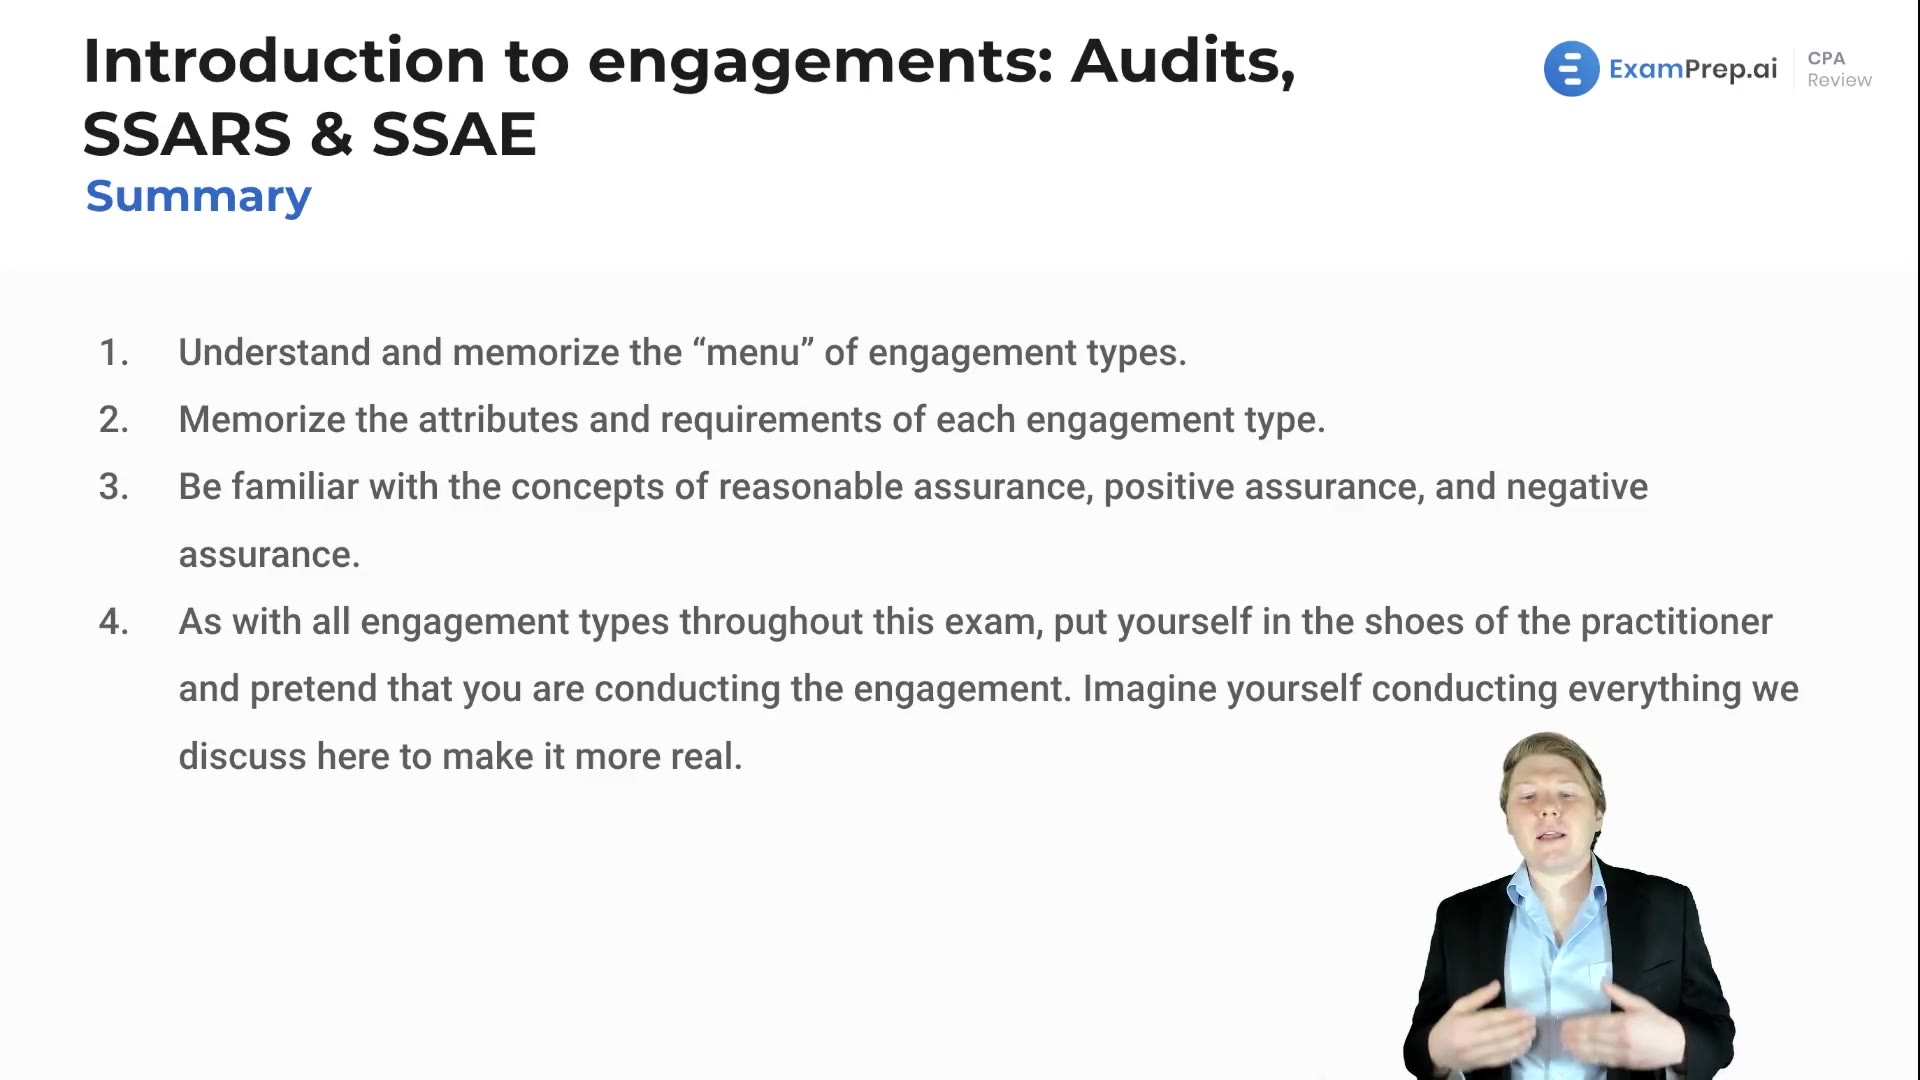 Introduction to Engagements: Audits, SSARS & SSAE Summary lesson thumbnail